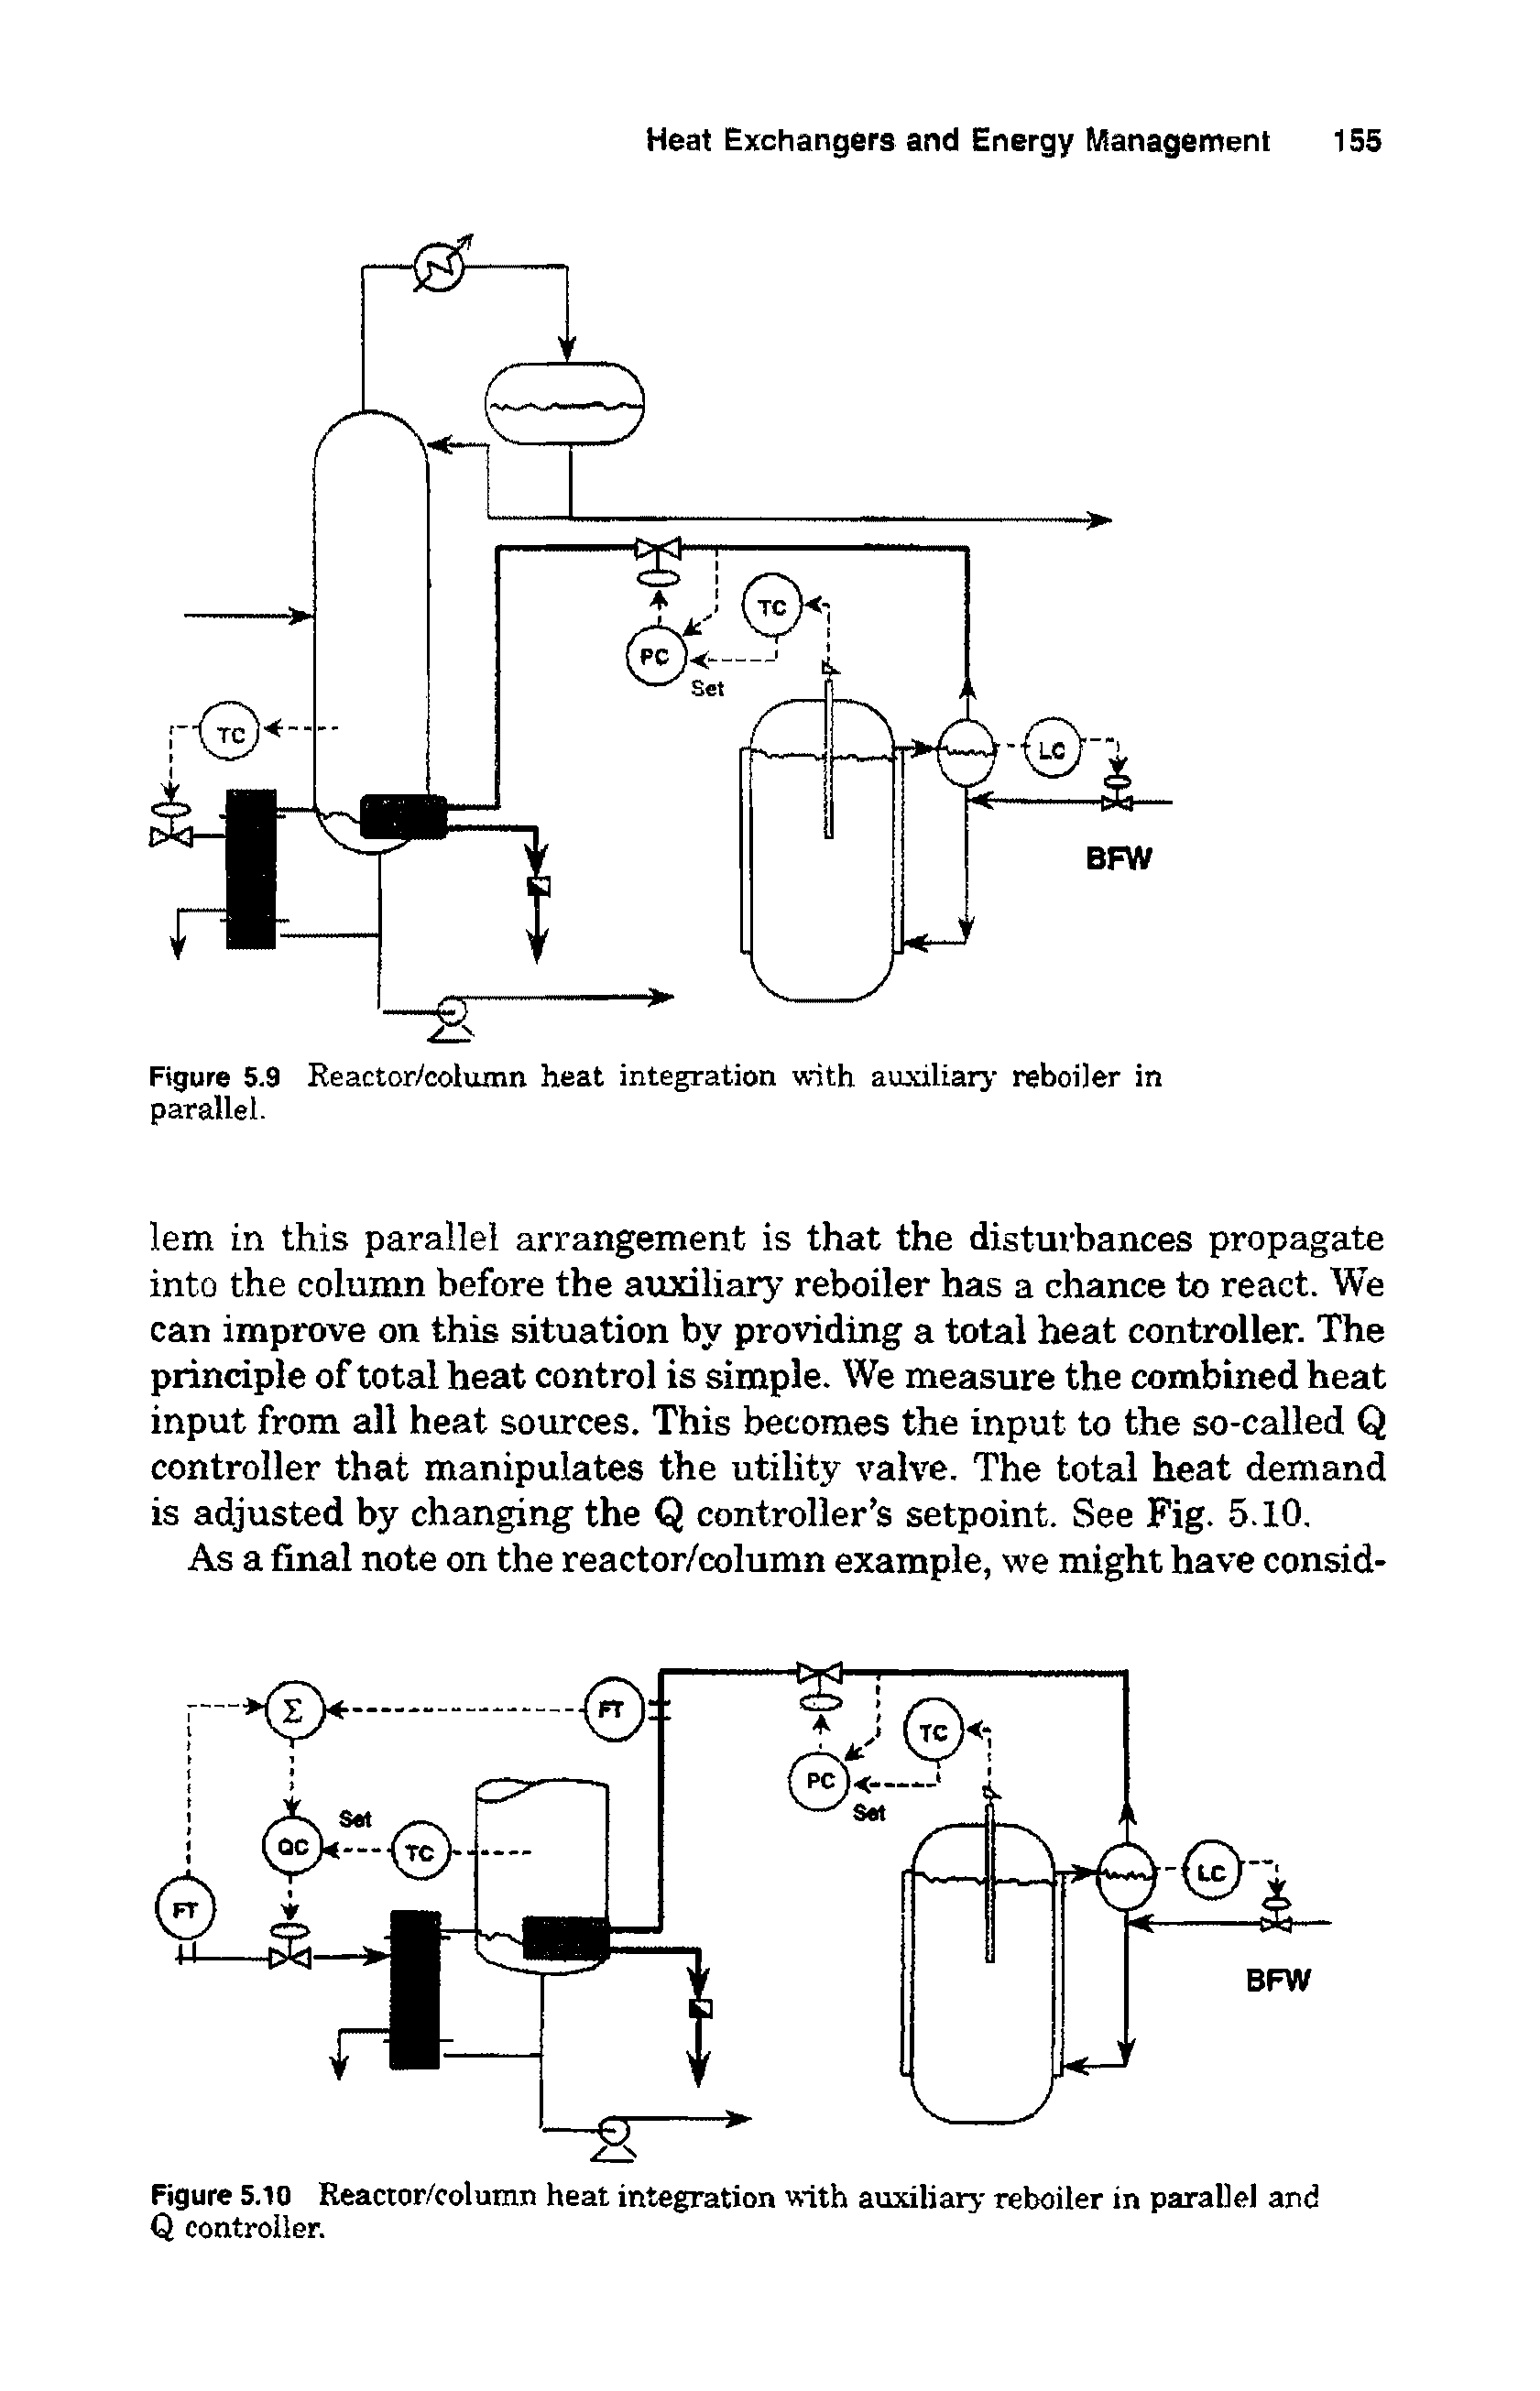 Figure 5.10 Reactor/column heat integration with auxiliary reboiler in parallel and Q controller.